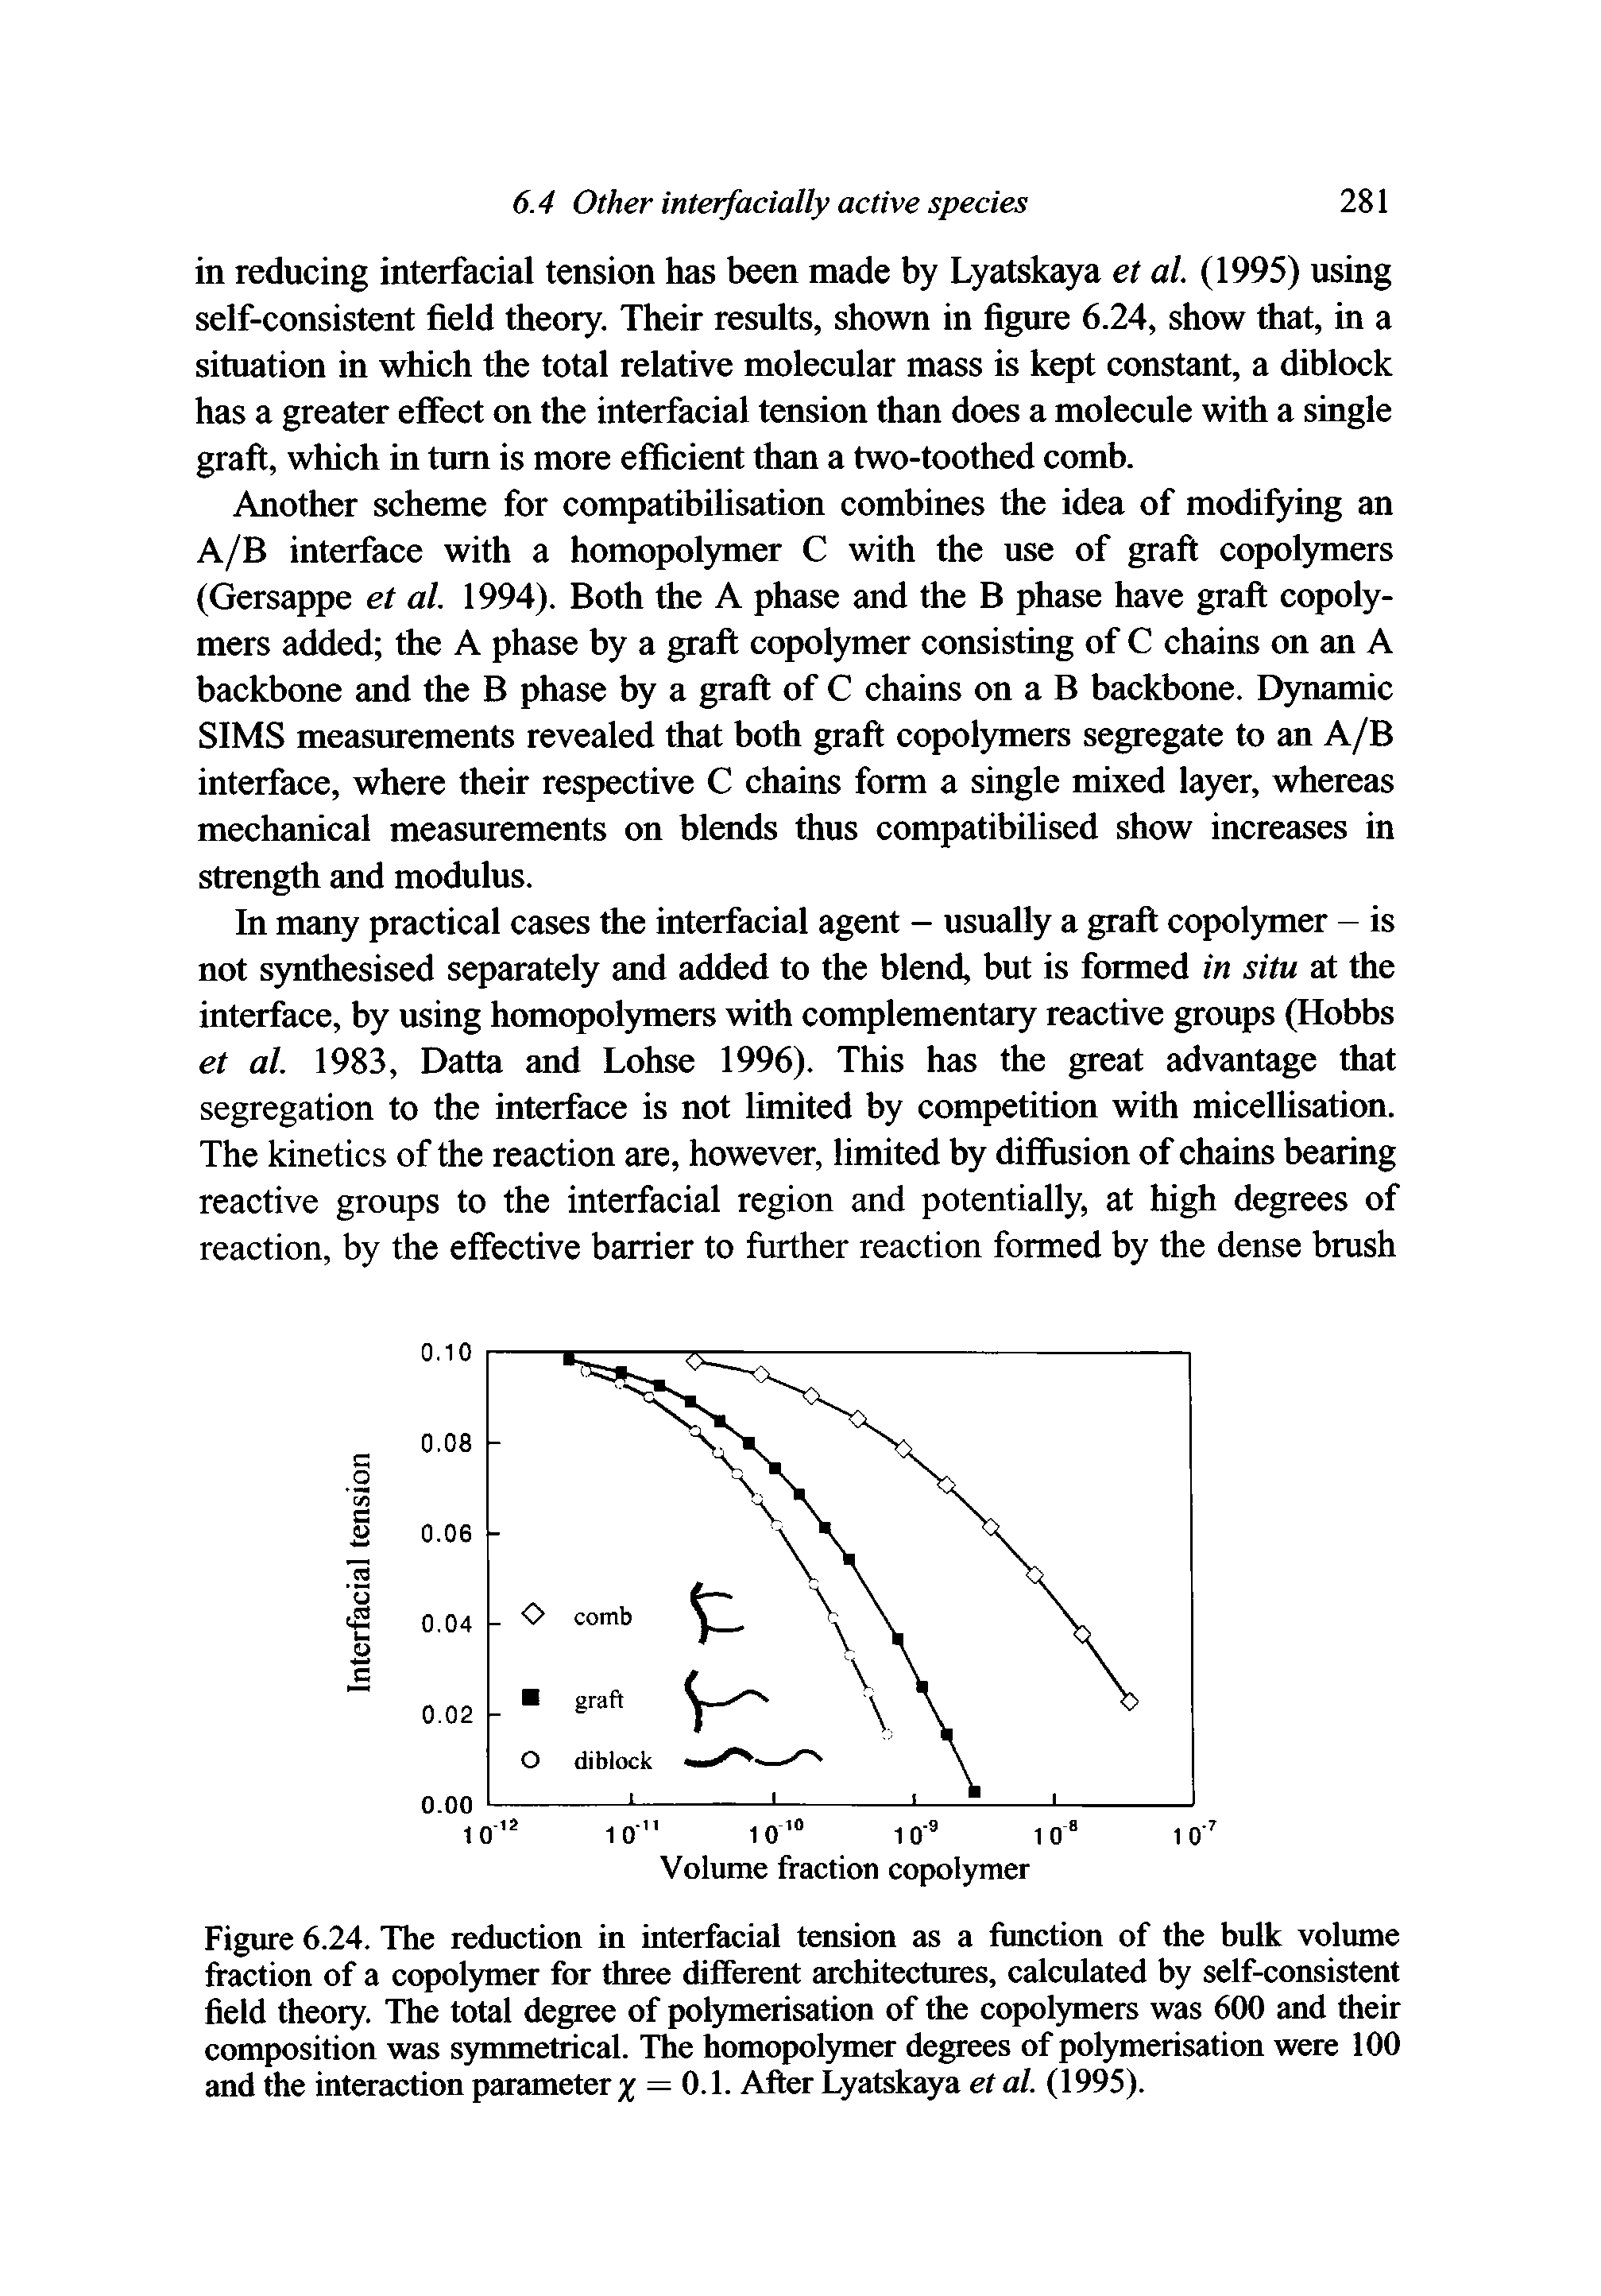 Figure 6.24. The reduction in interfacial tension as a function of the bulk volume fraction of a copolymer for three different architectures, calculated by self-consistent field theory. The total degree of polymerisation of the copolymers was 600 and their composition was symmetrical. The homopolymer degrees of polymerisation were 100 and the interaction parameter % = 0.1. After Lyatskaya et al. (1995).